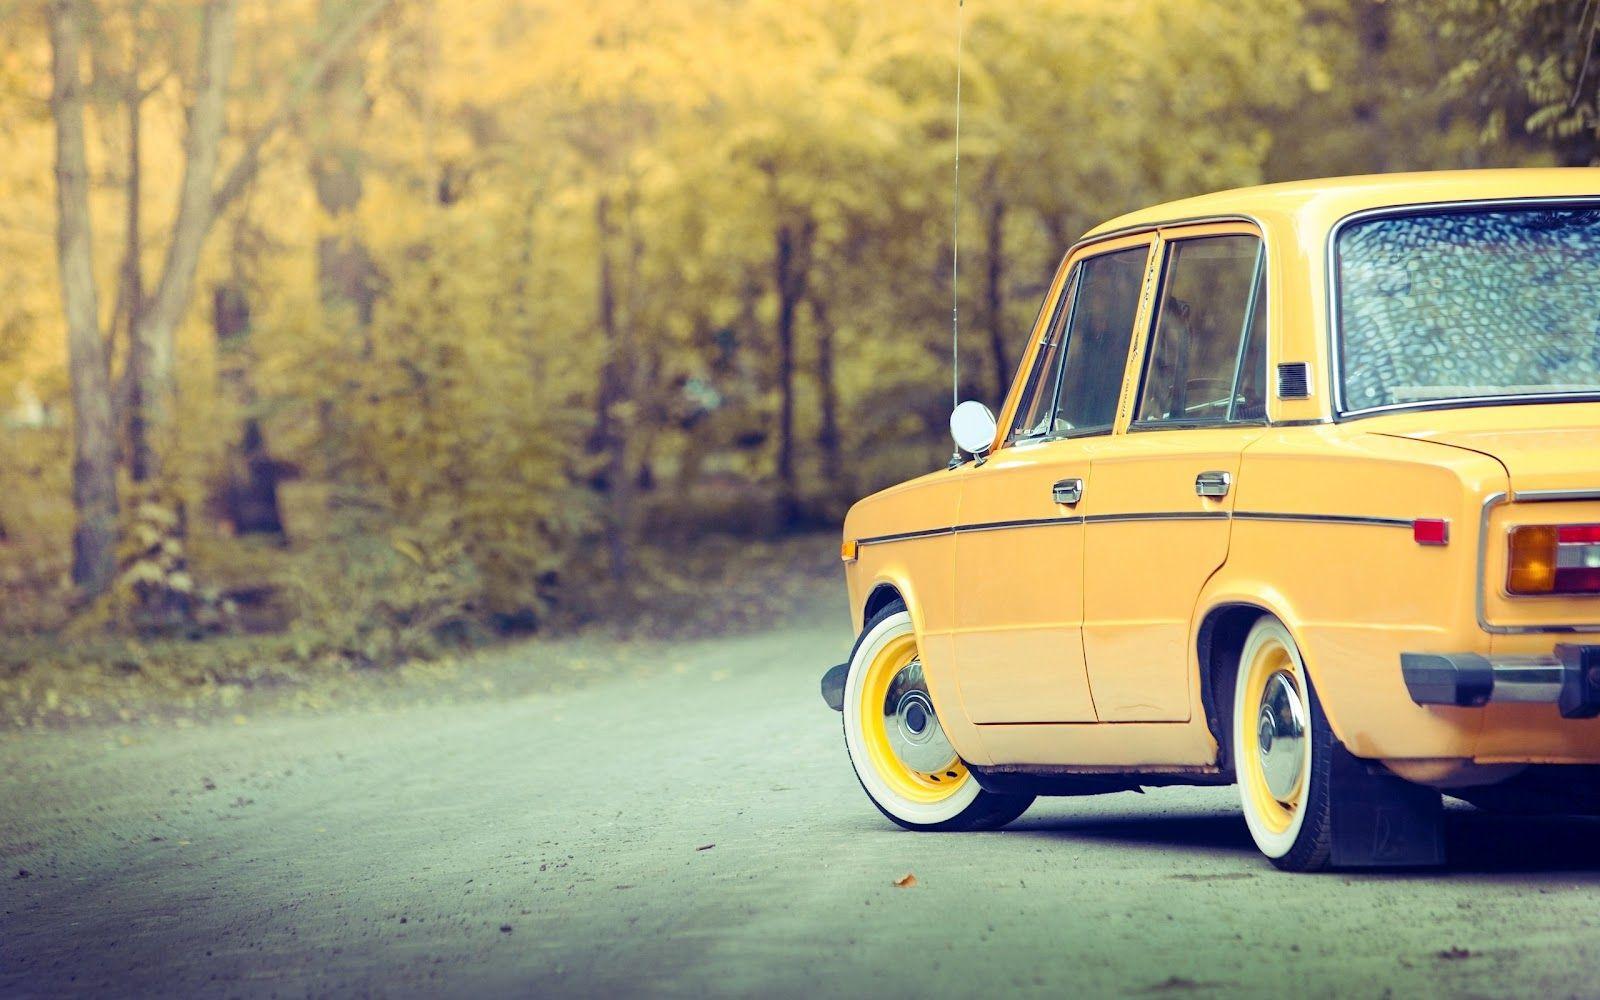 VIntage cars: Russian old Lada on the road wallpaper